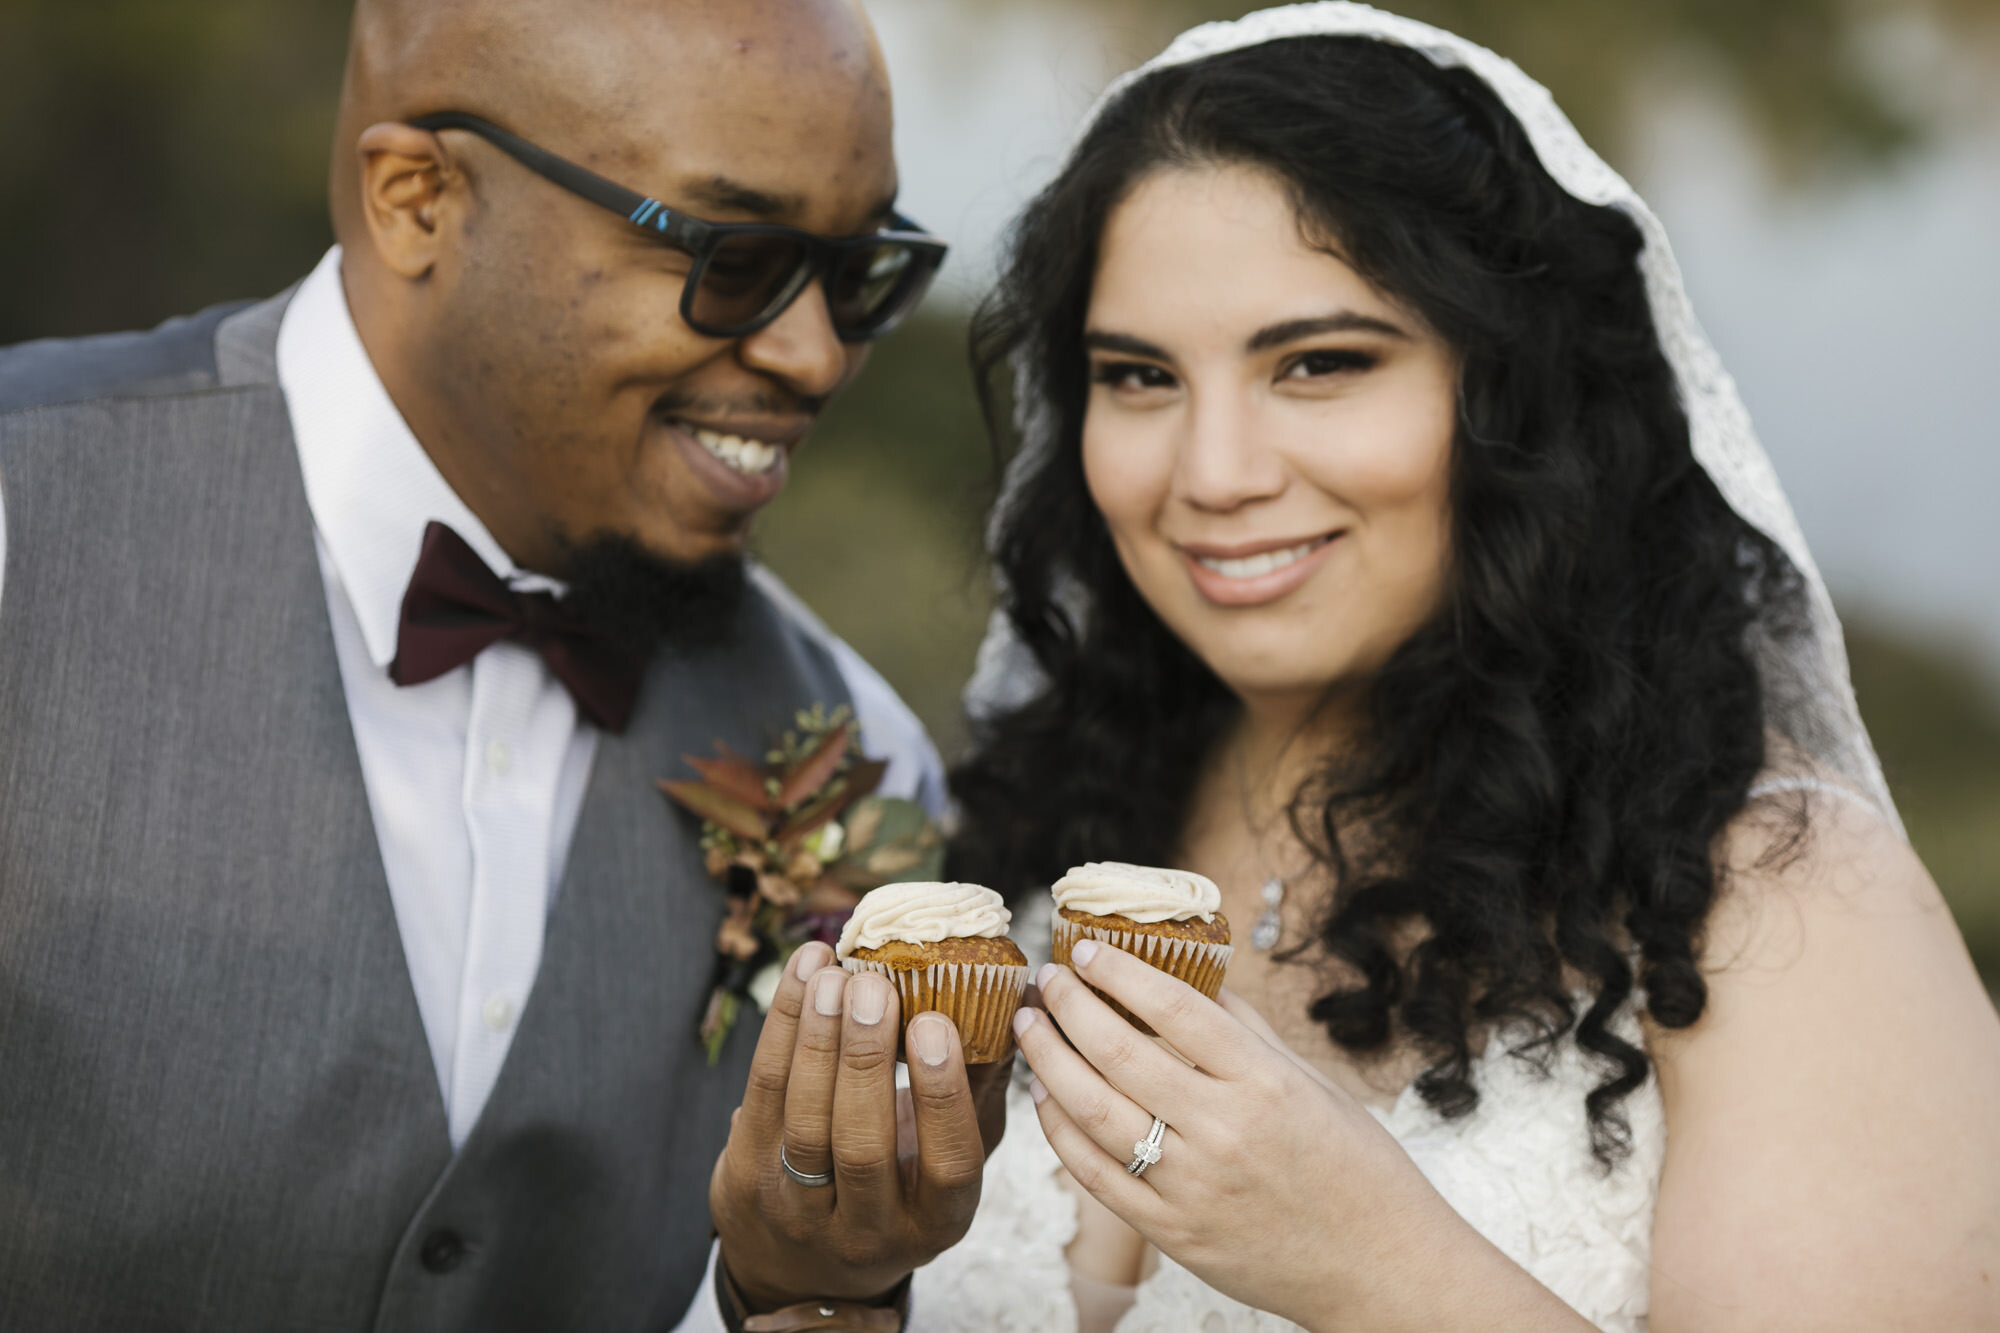 Bride and groom enjoy champagne and cupcakes after their wedding ceremony in the forest